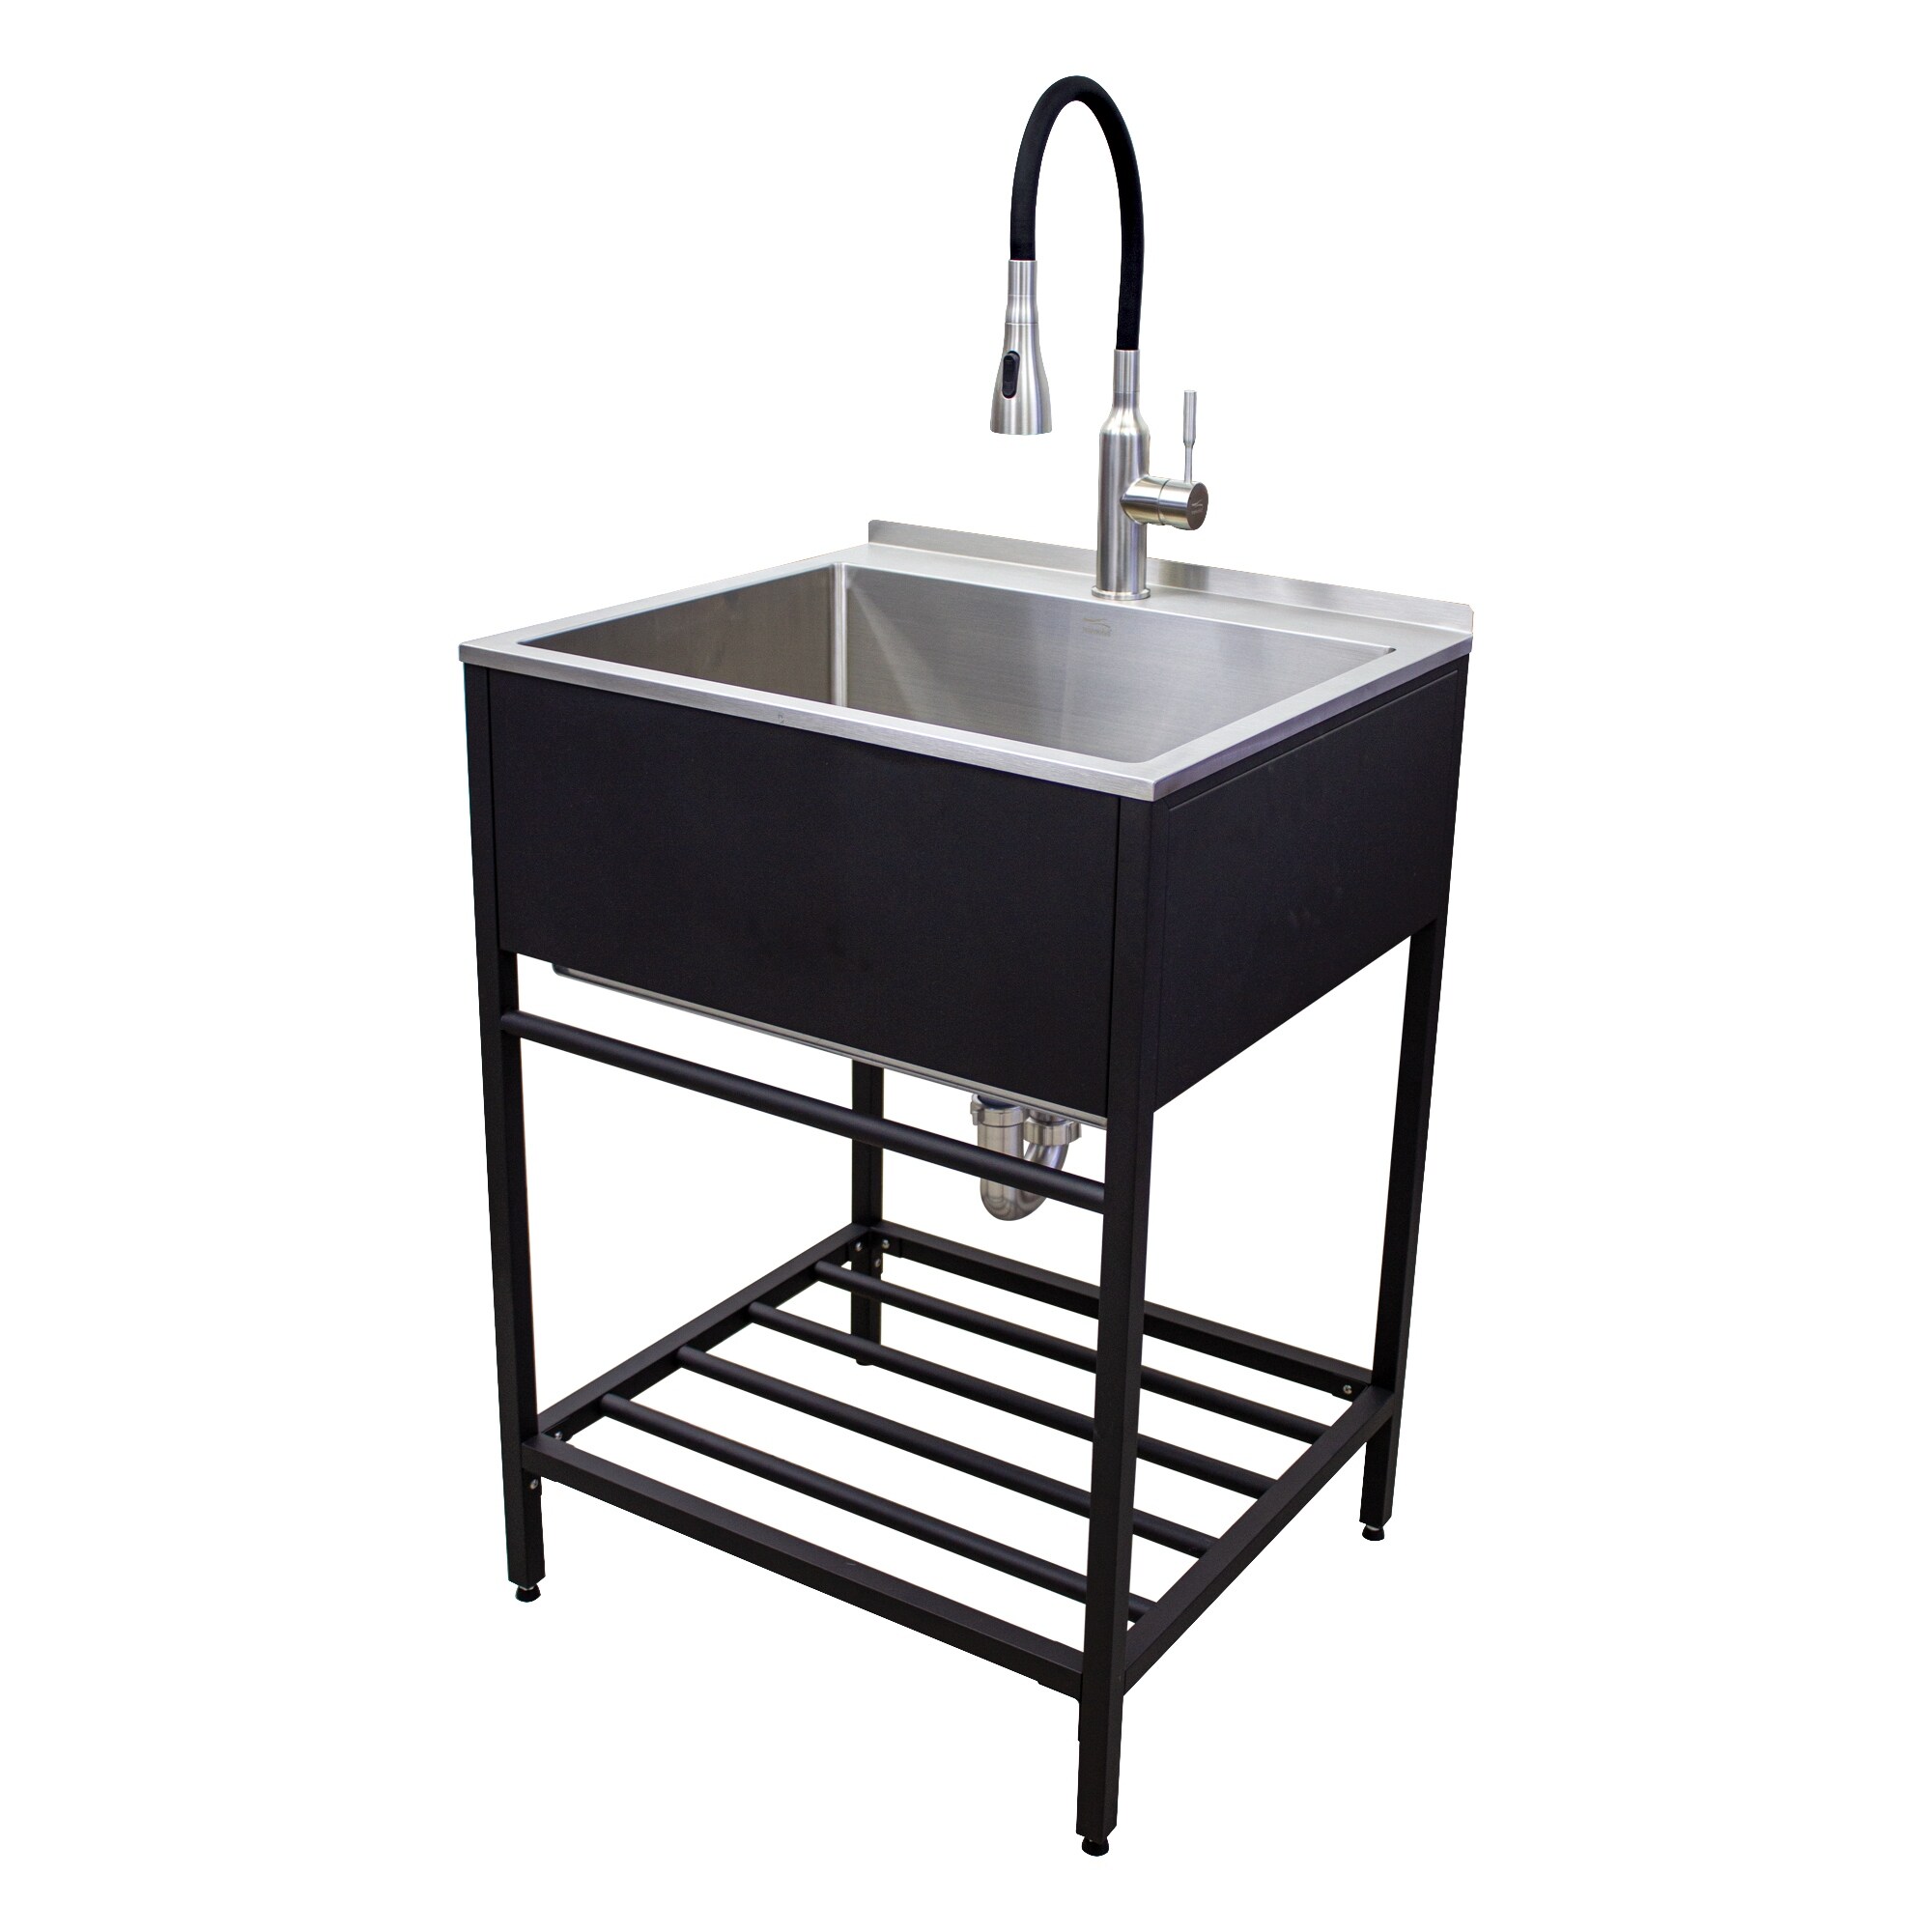 https://ak1.ostkcdn.com/images/products/is/images/direct/866979f9d3e1f201a1b0b6de8c1830dc763d2169/Transolid-25-in.-Stainless-Steel-Laundry-Sink-with-Wash-Stand.jpg